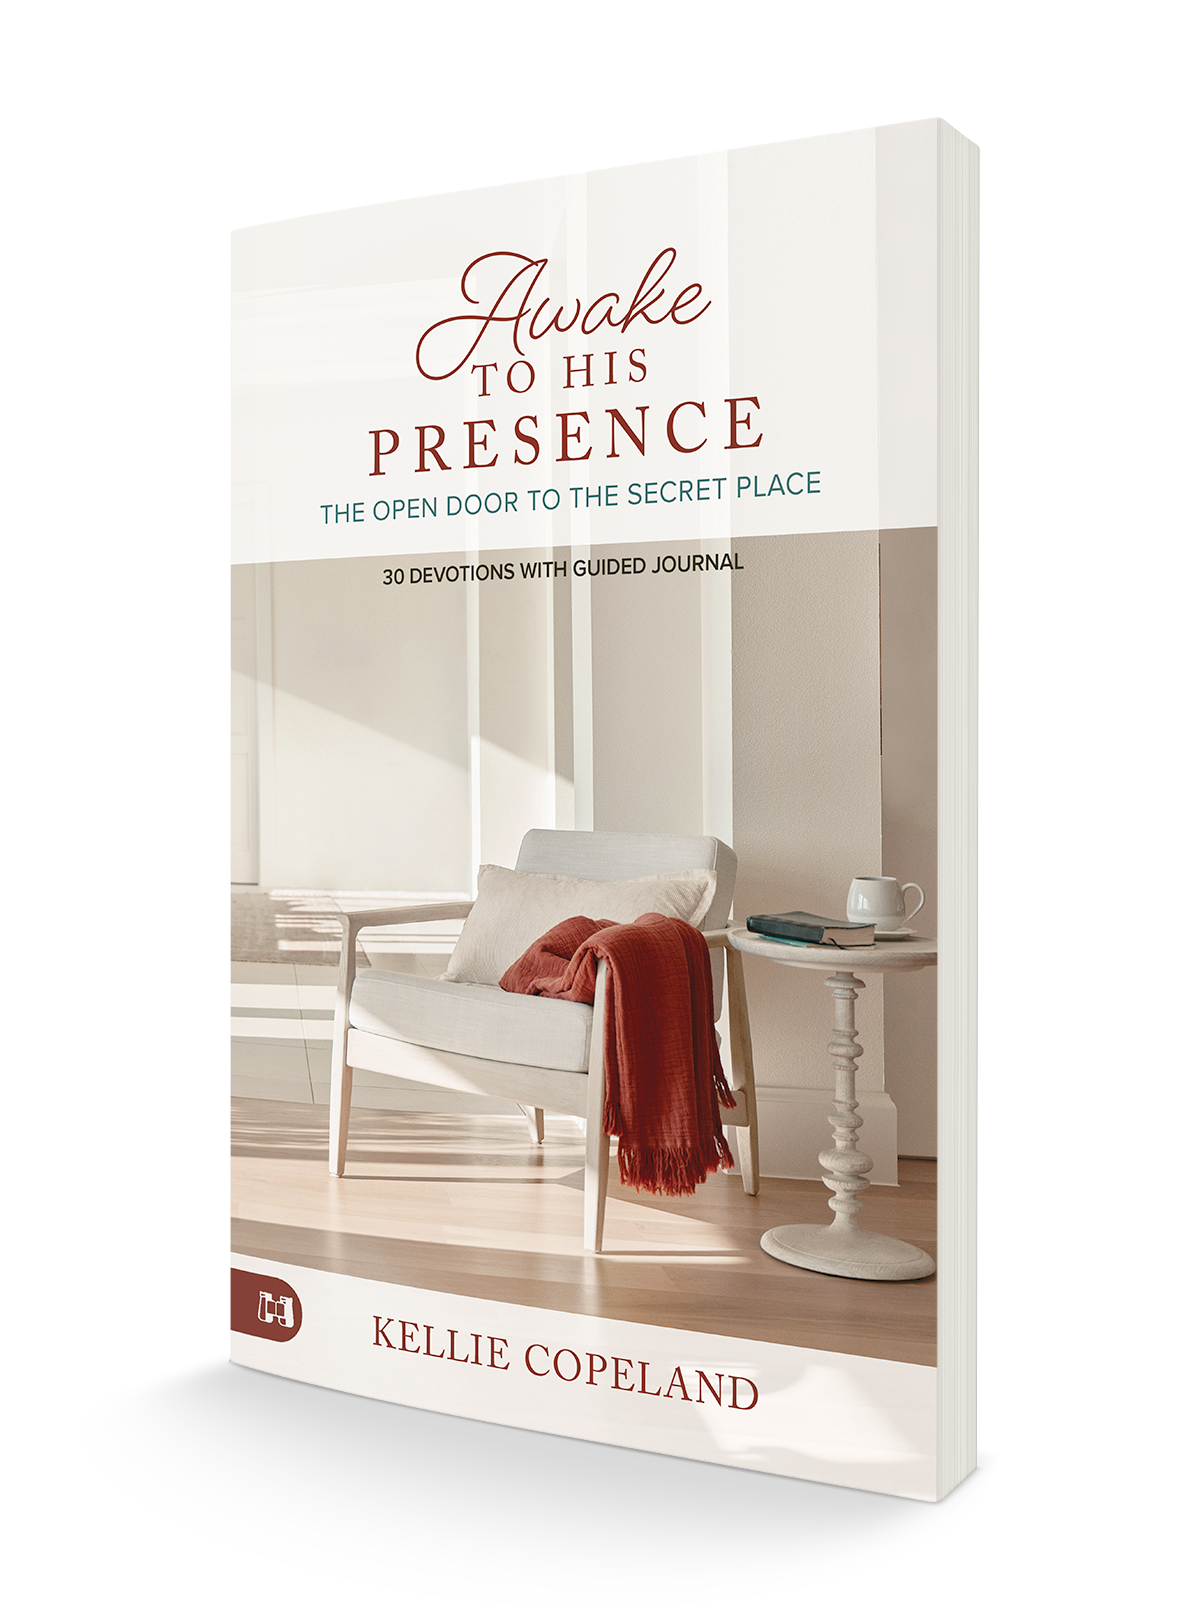 Awake to His Presence: The Open Door to the Secret Place, 30 Devotions with Guided Journal Paperback – January 1, 2023